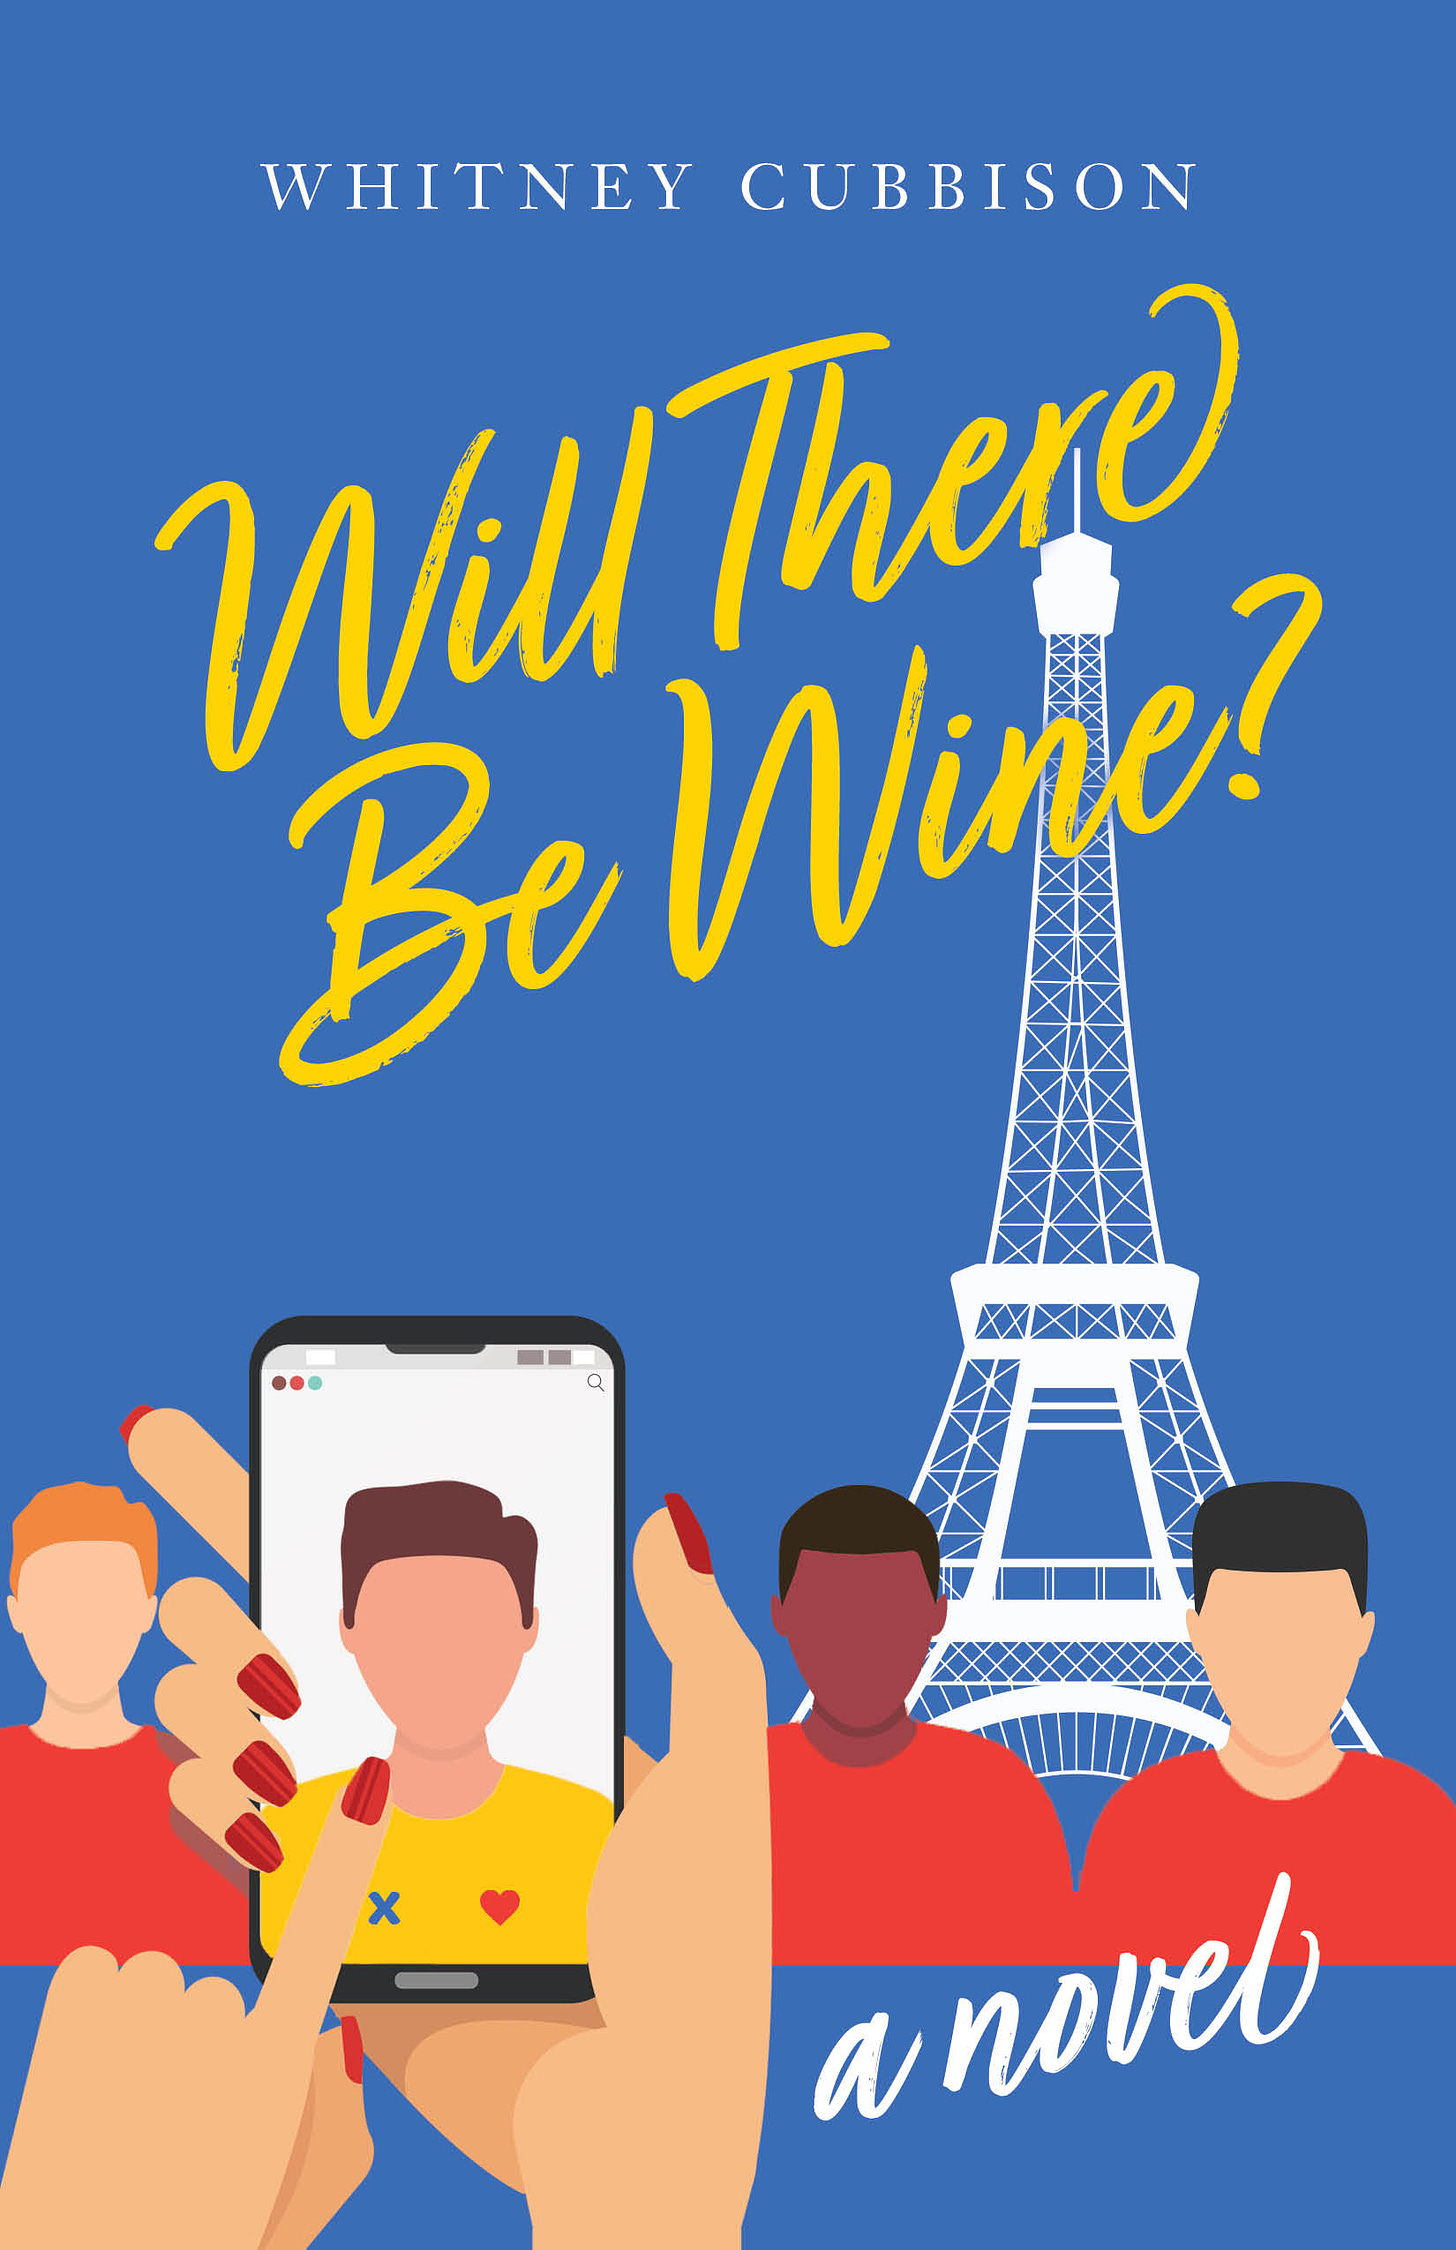 The cover of a book with the Eiffel Tower in the background and someone looking at a man on a phone getting ready to swipe left or right. The text on the cover says Will There Be Wine? a novel by Whitney Cubbison.